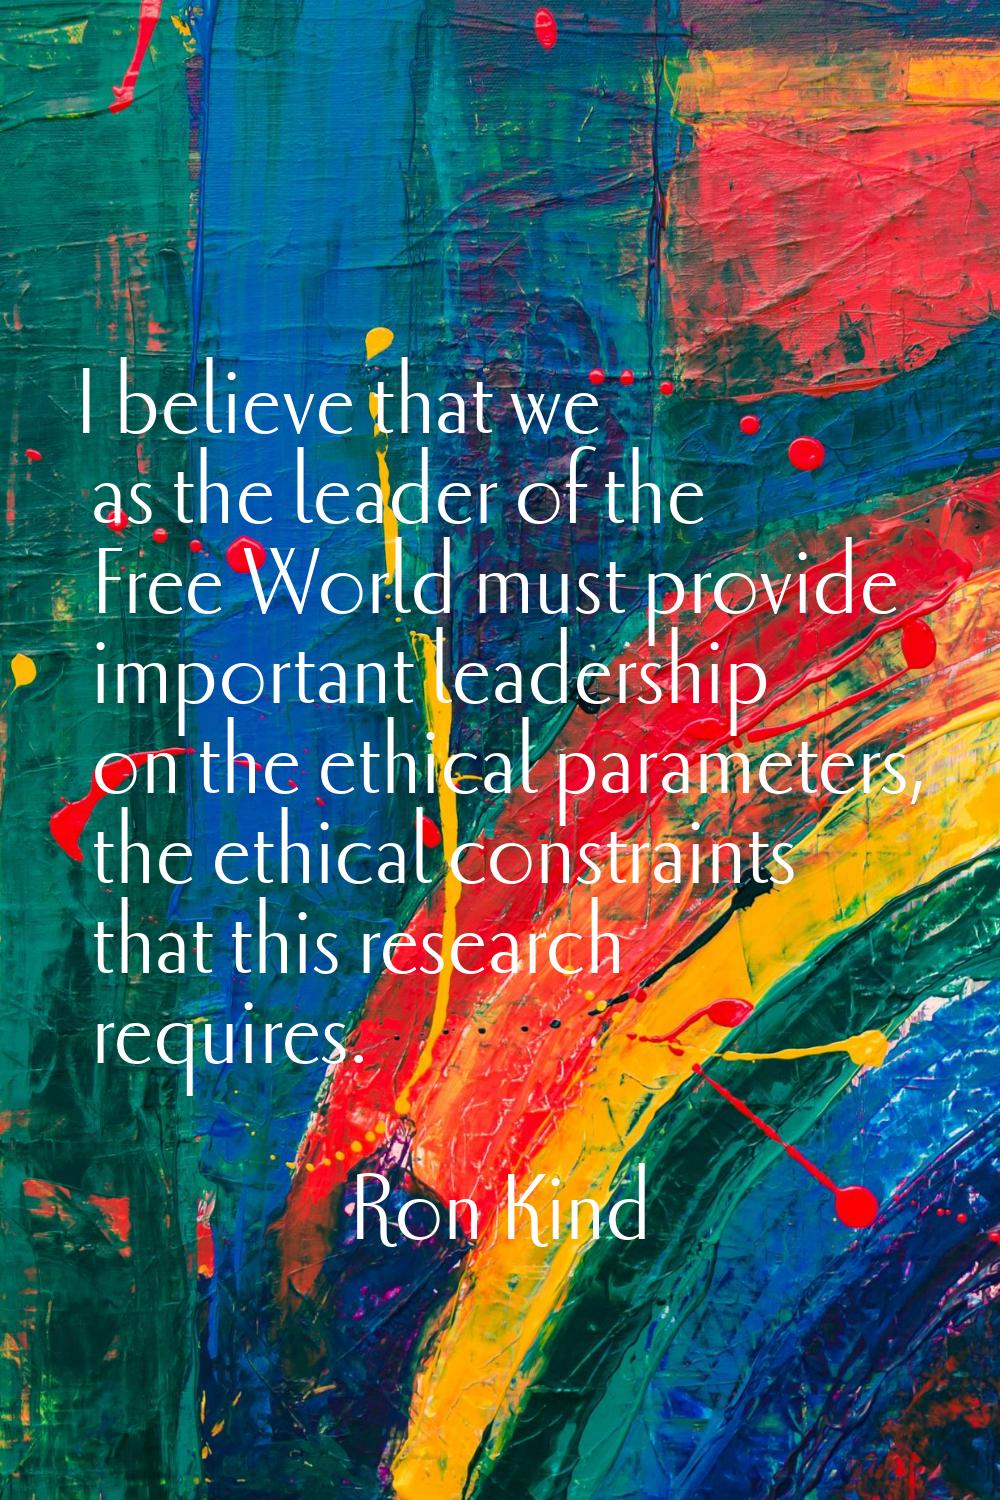 I believe that we as the leader of the Free World must provide important leadership on the ethical 